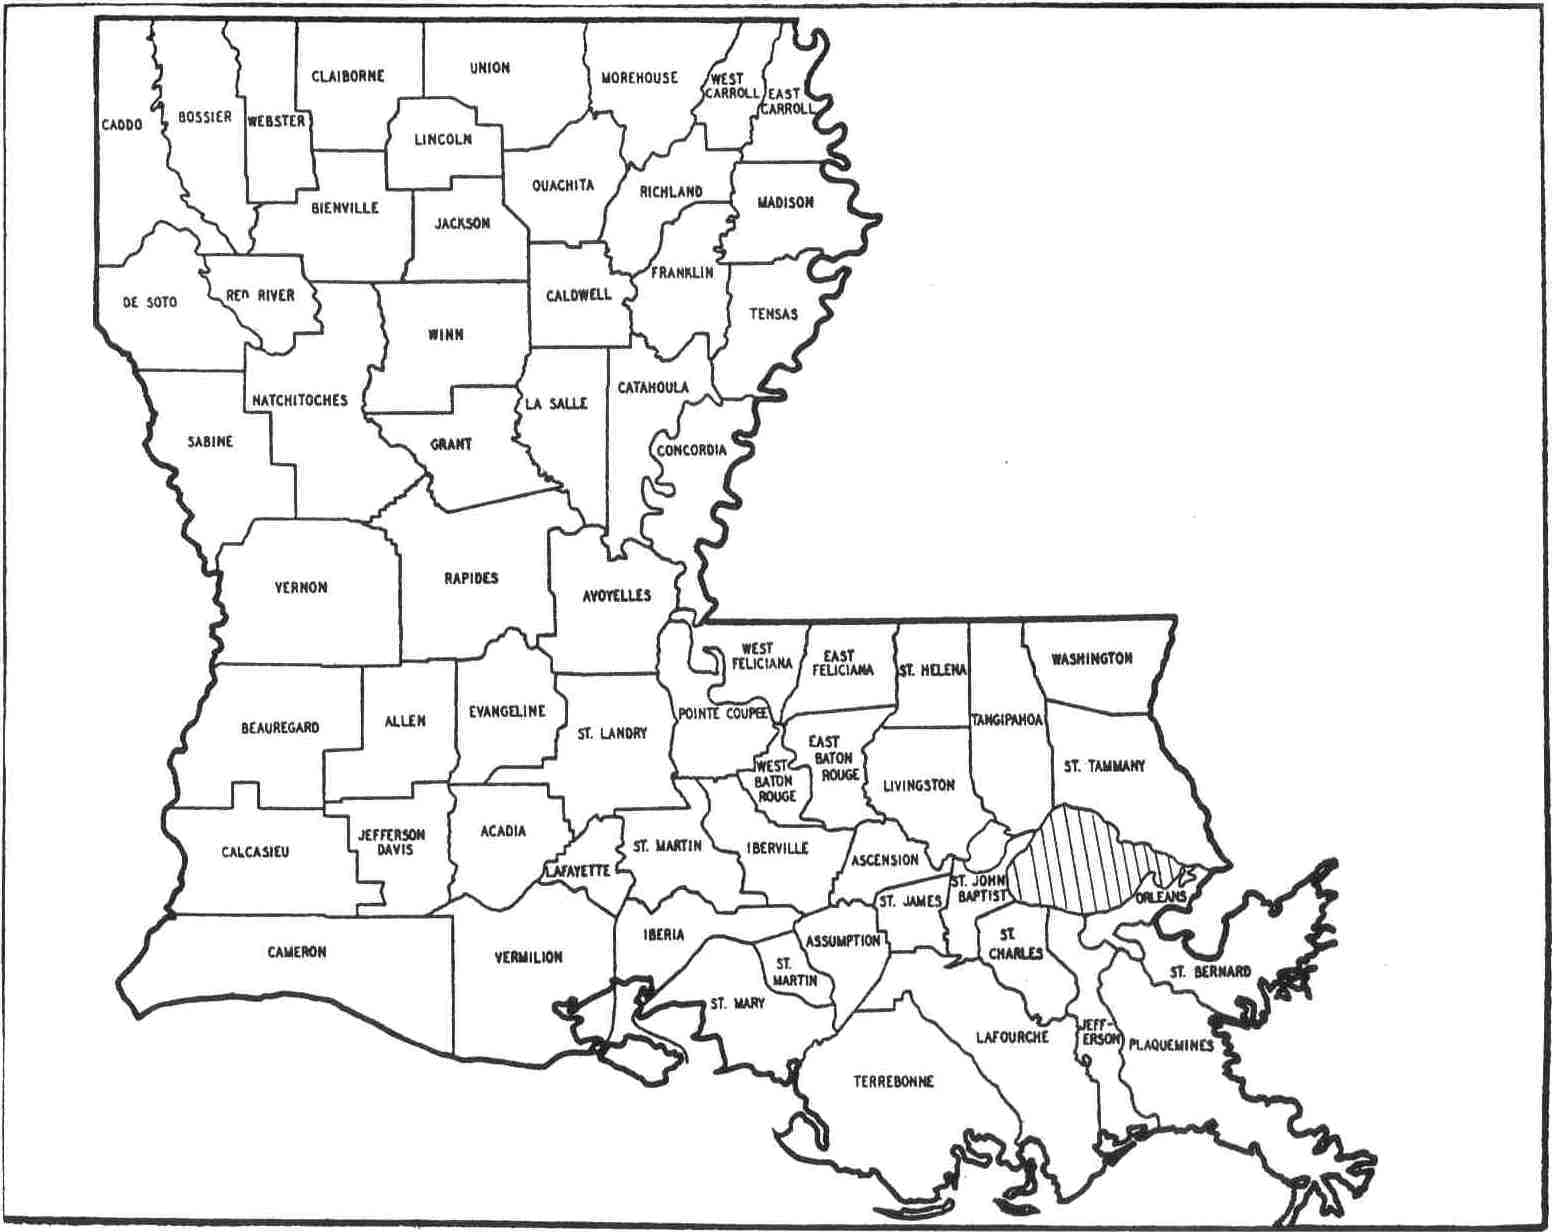 5 Best Images of Printable Map Of Louisiana Cities Louisiana Map with